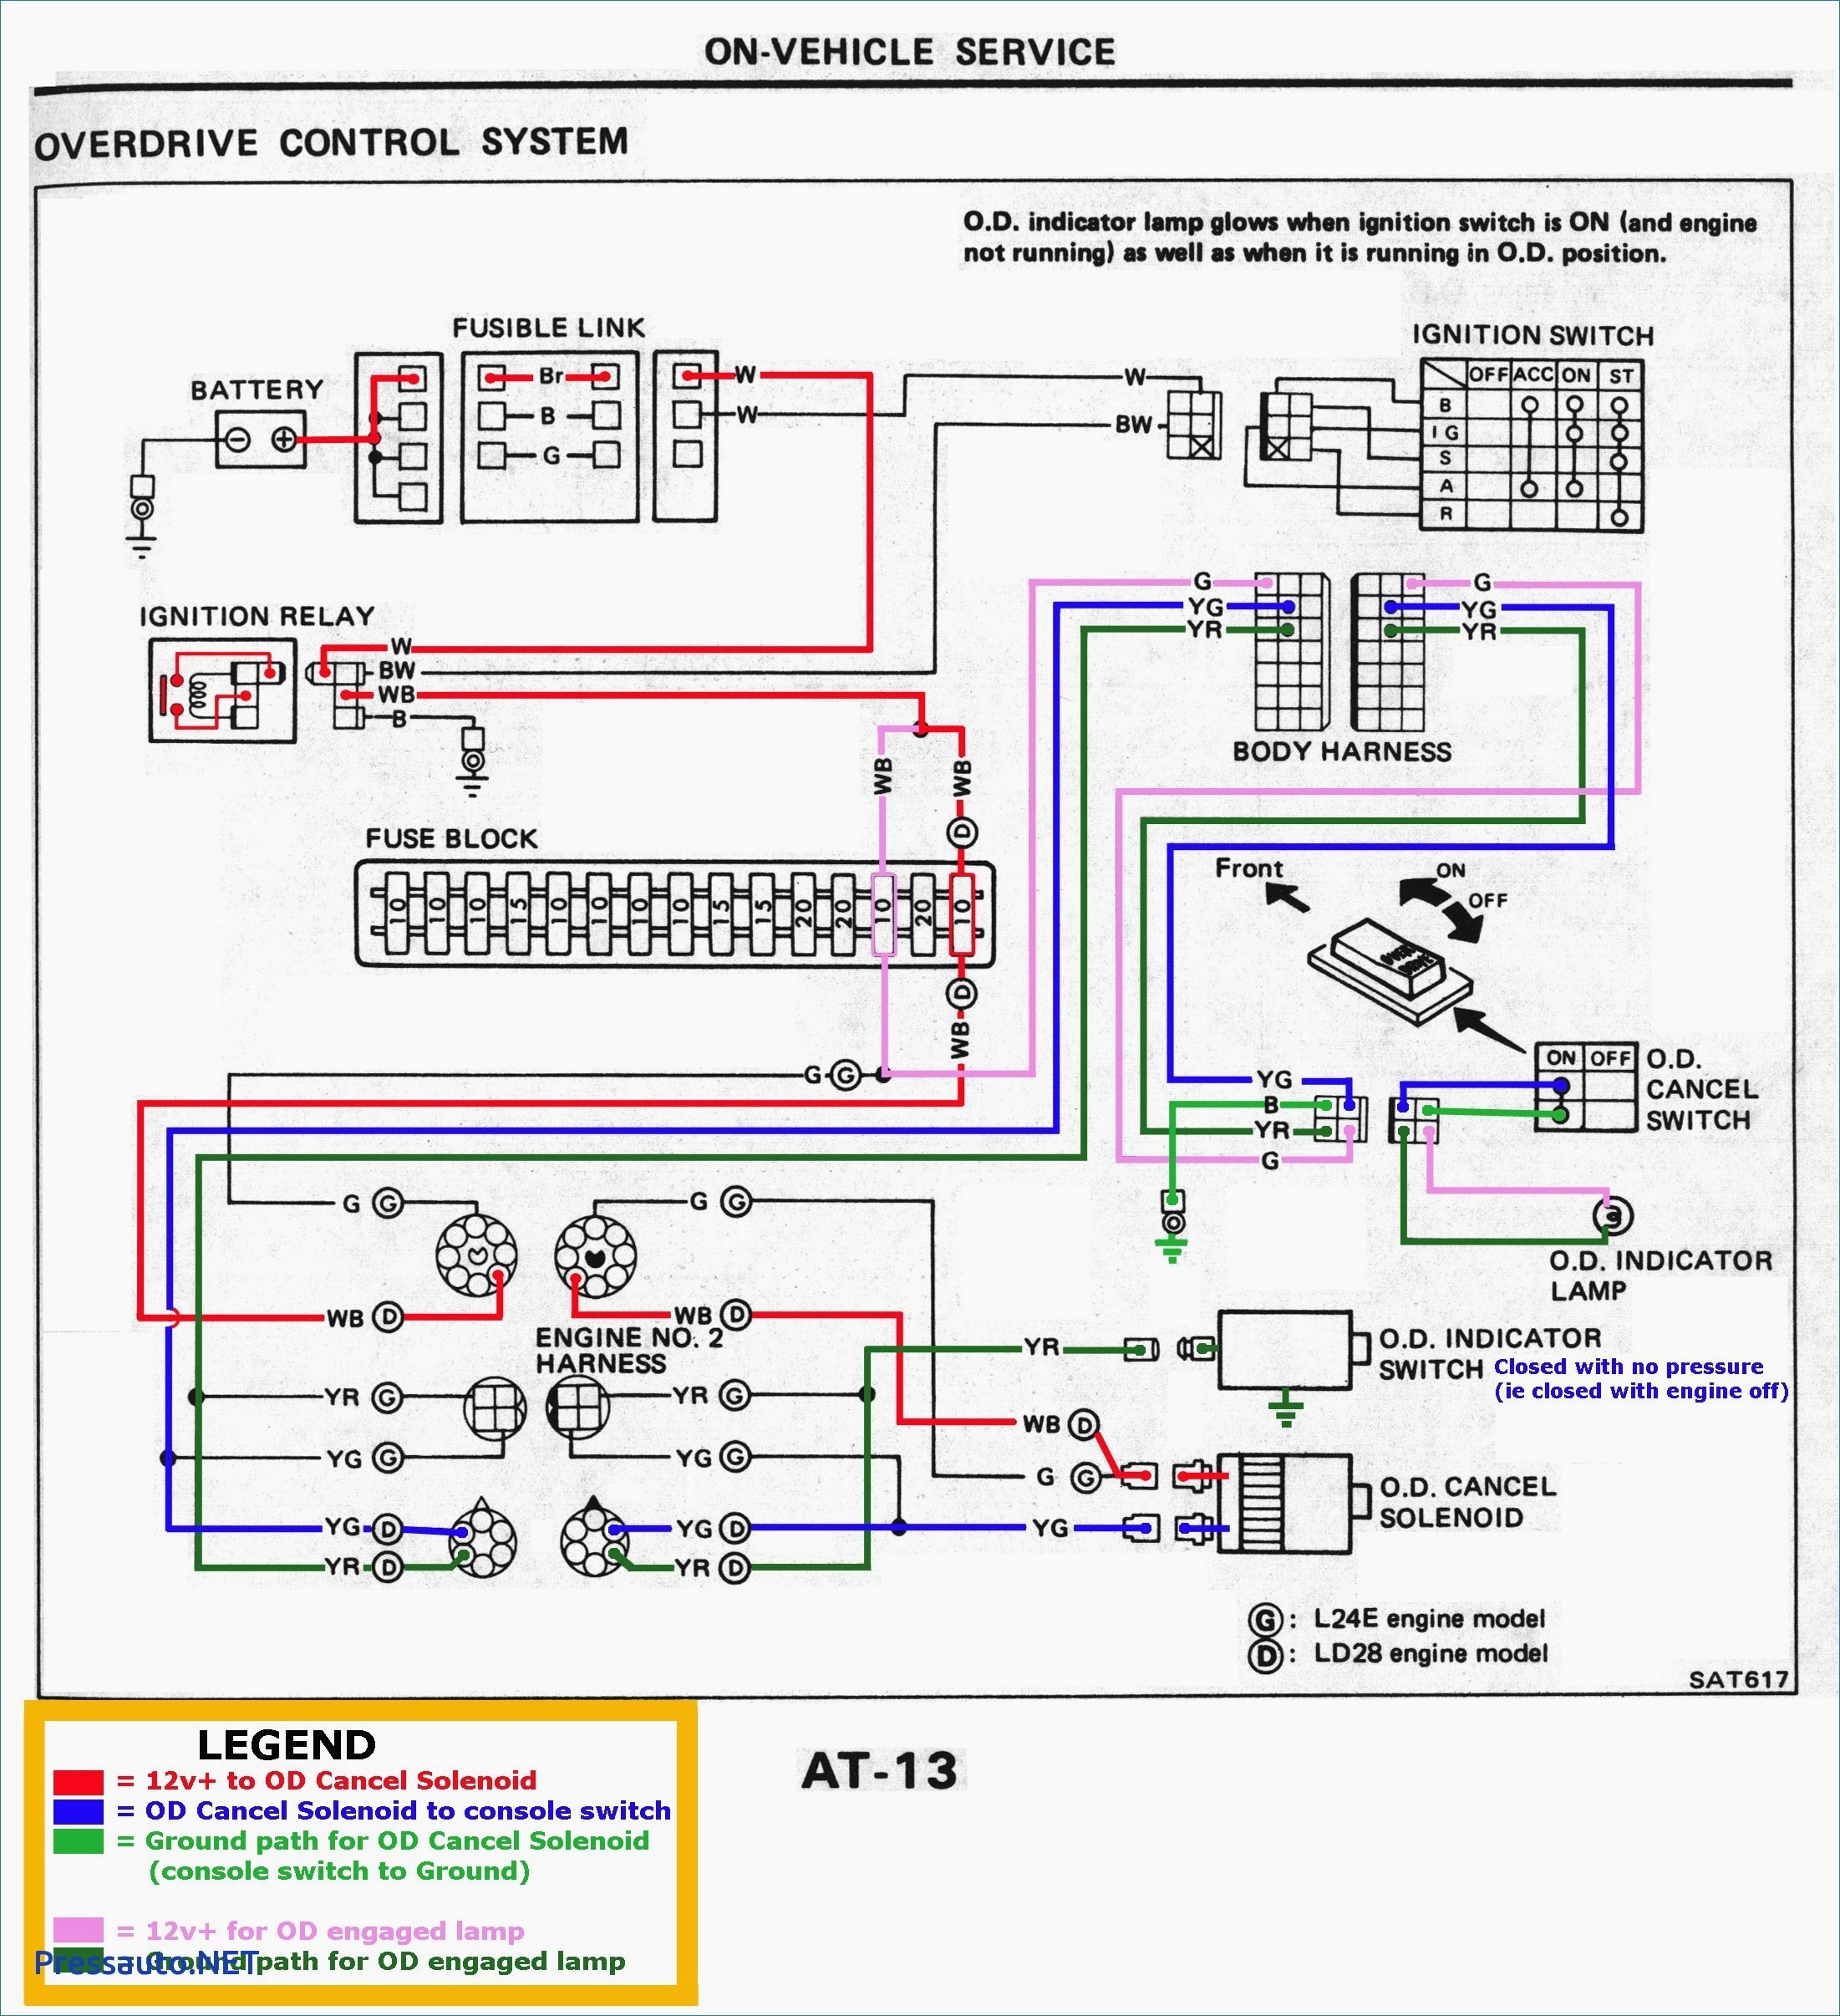 Free Vehicle Wiring Diagrams Automotive Wiring Diagram Line Fresh Free Vehicle Wiring Diagrams Fresh Magnificent